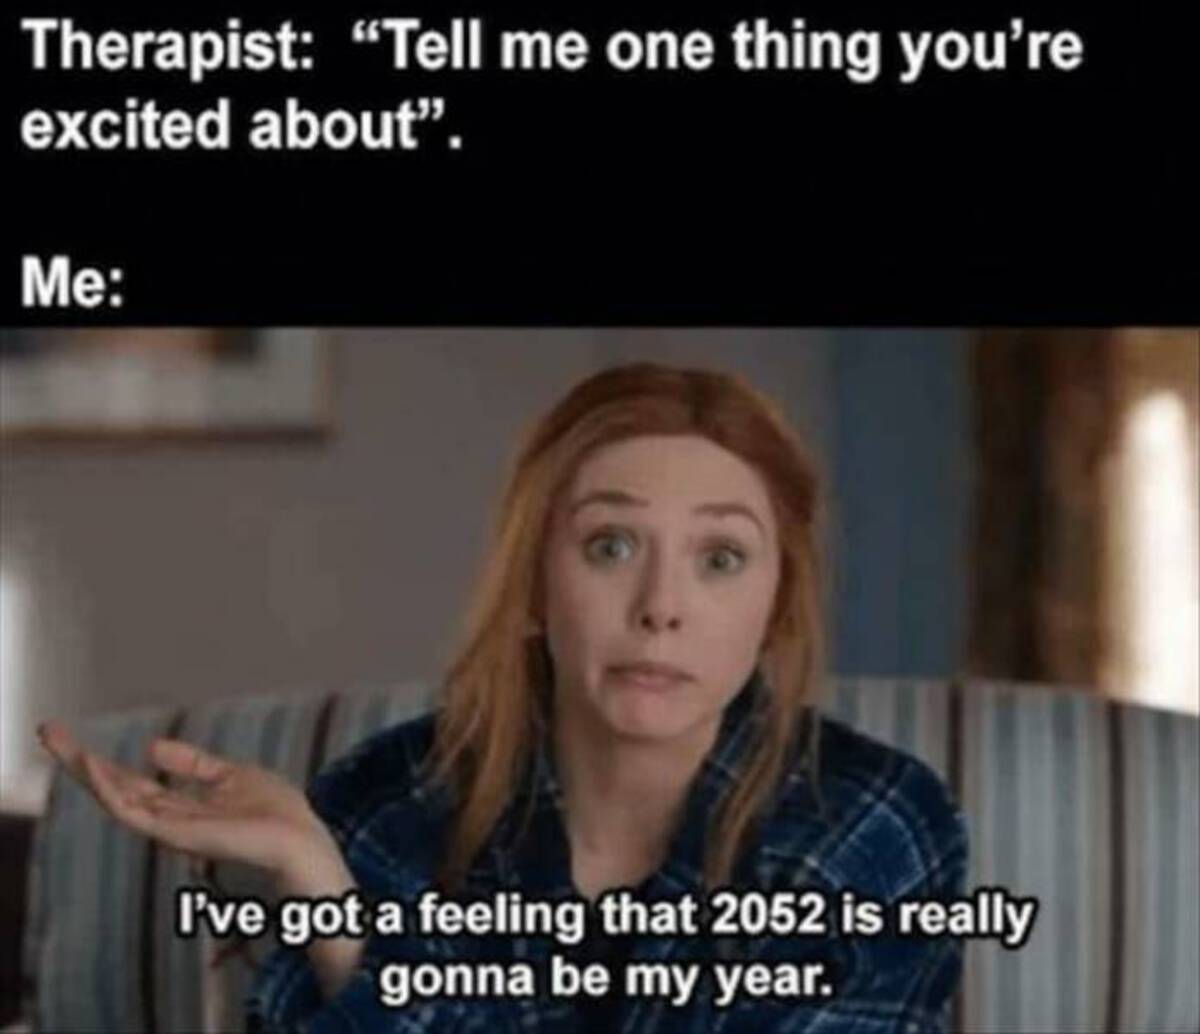 wandavision episode 7 - Therapist "Tell me one thing you're excited about". Me I've got a feeling that 2052 is really gonna be my year.